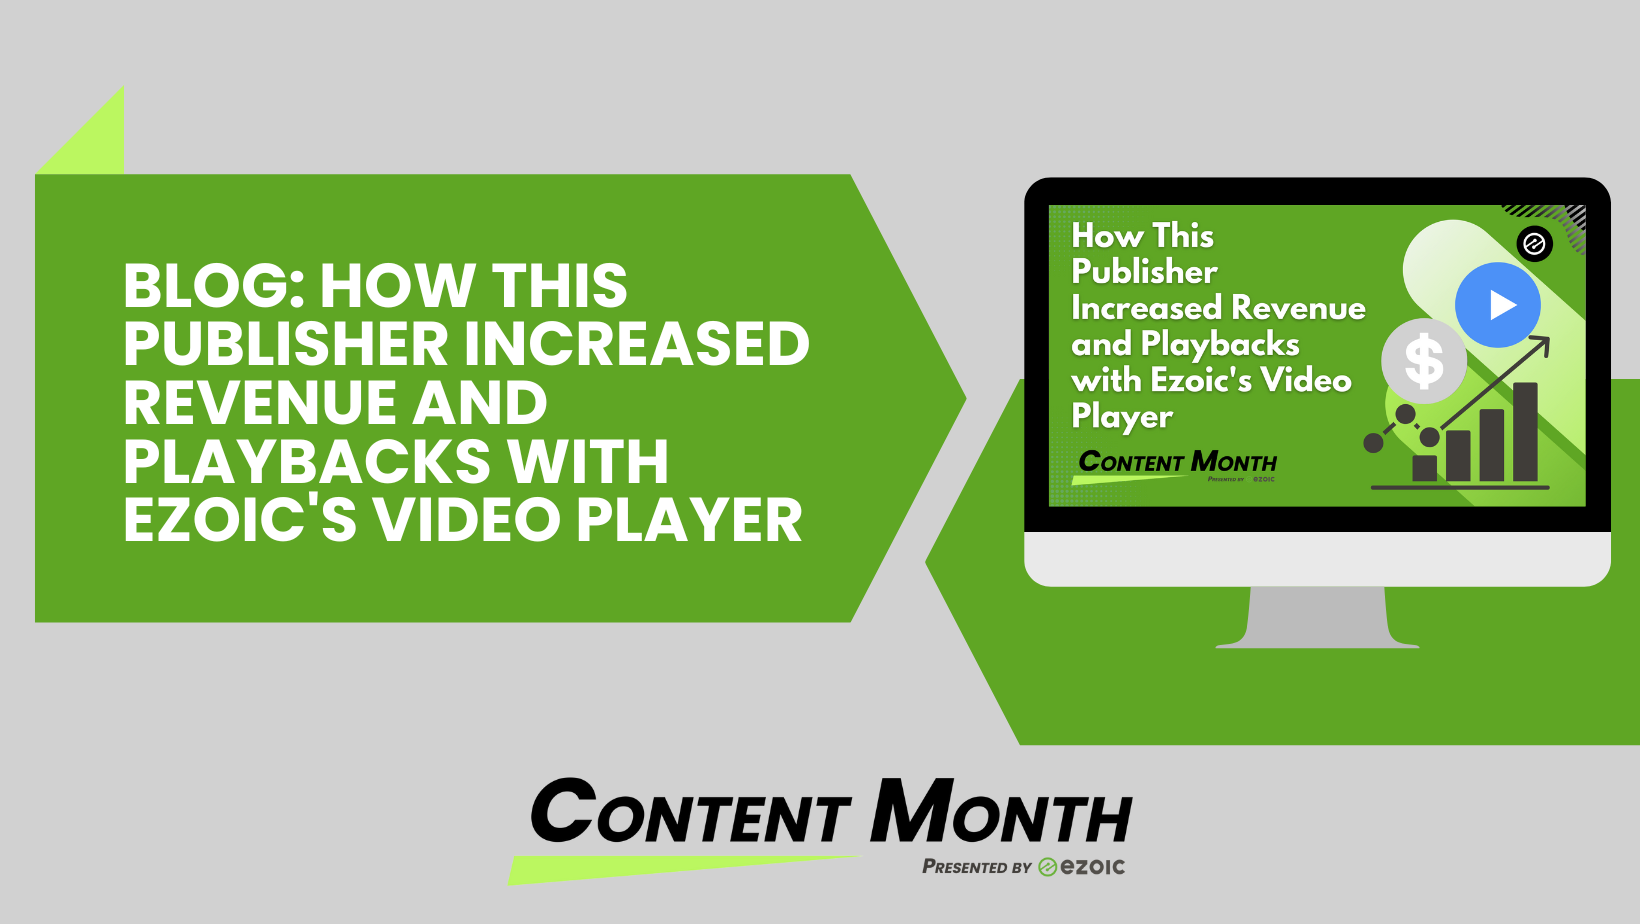 How-This-Publisher-Increased-Revenue-With-Video-Week-4-Blog